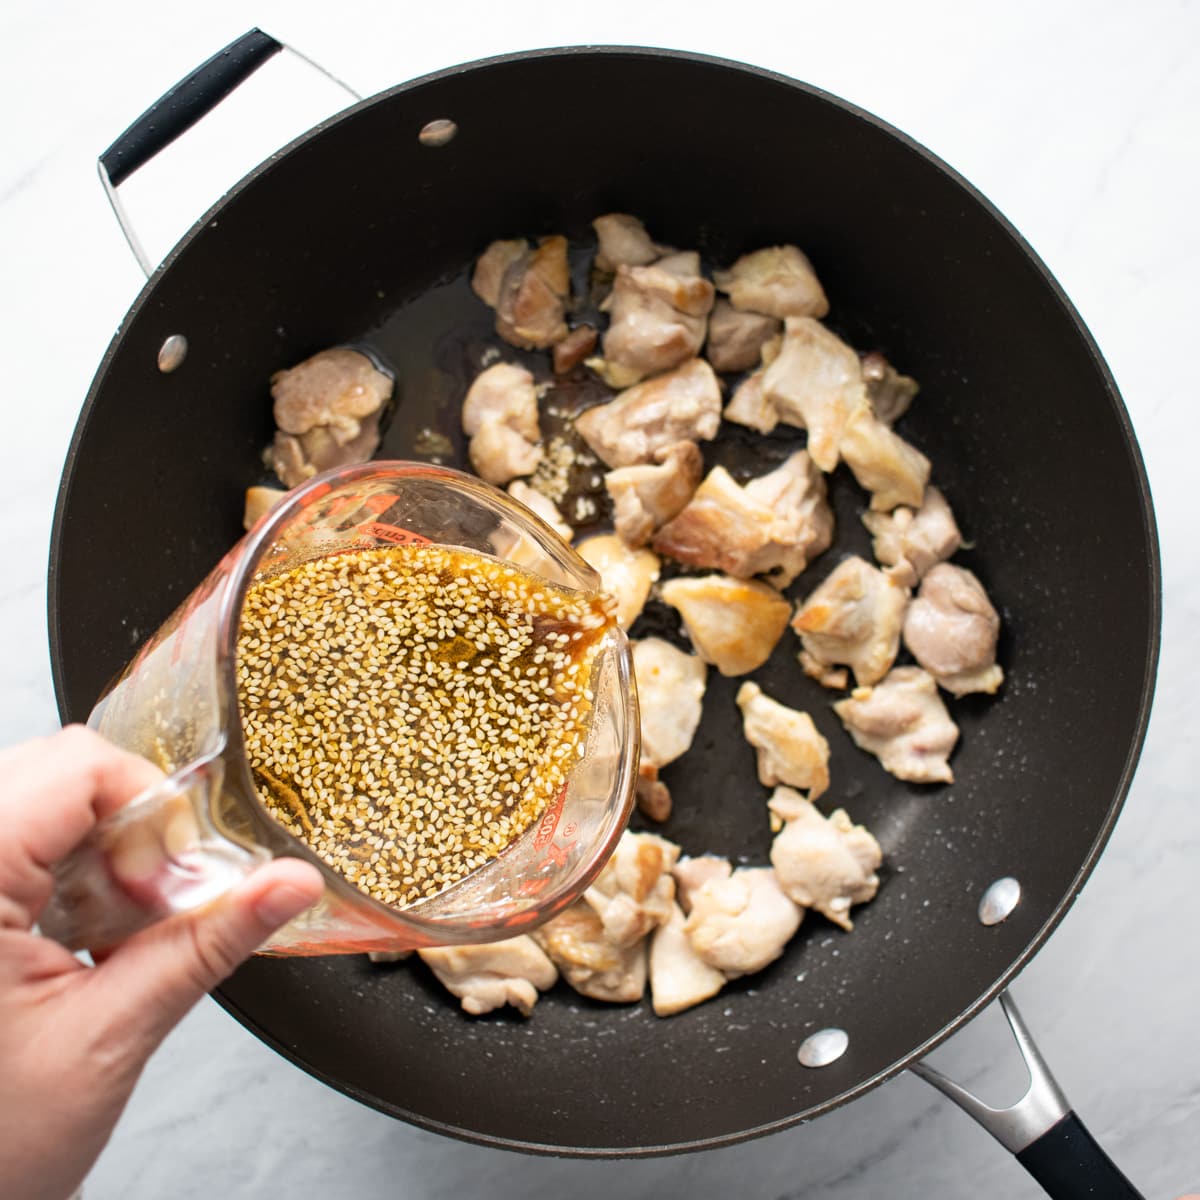 Pouring sesame sauce into a skillet with cooked chicken pieces.